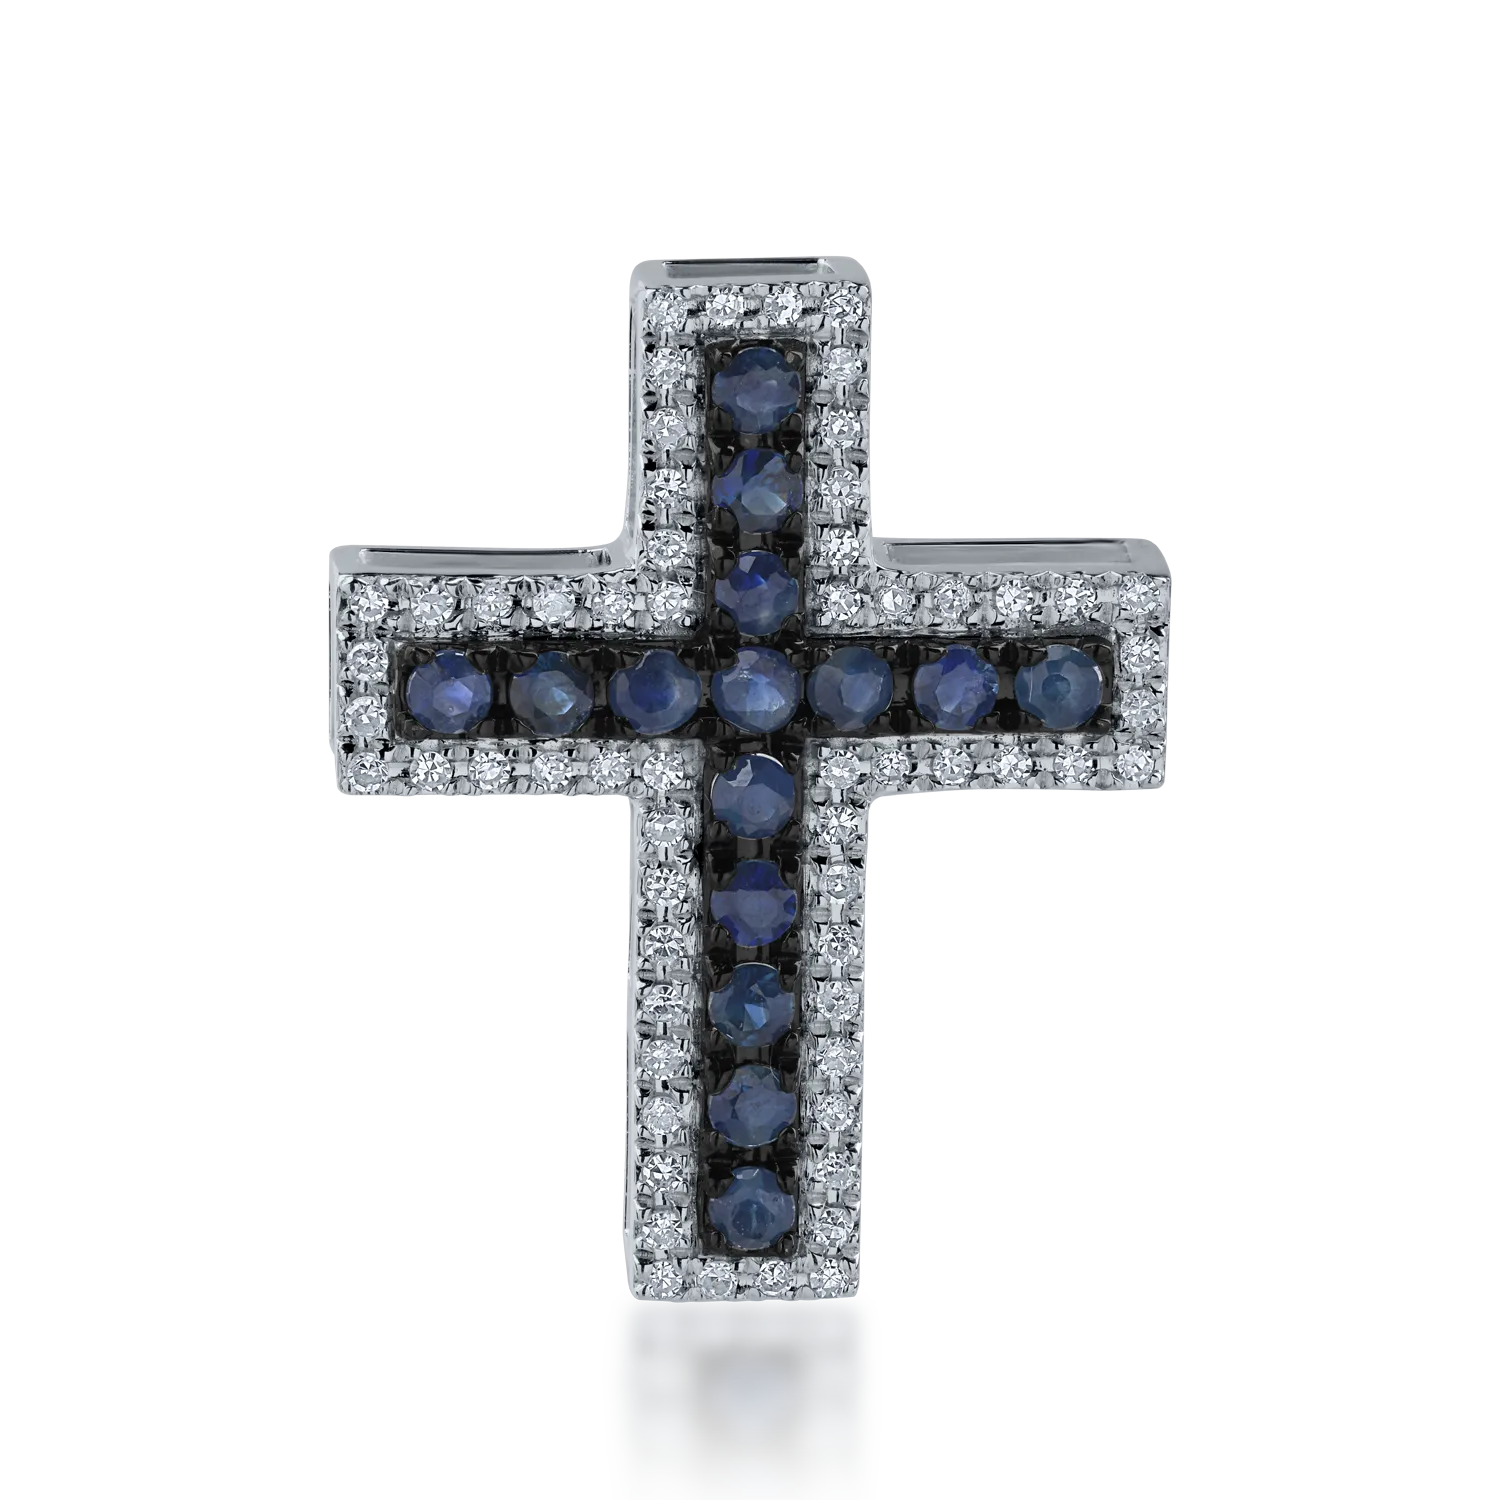 White gold cross pendant with 0.378ct sapphires and 0.123ct diamonds